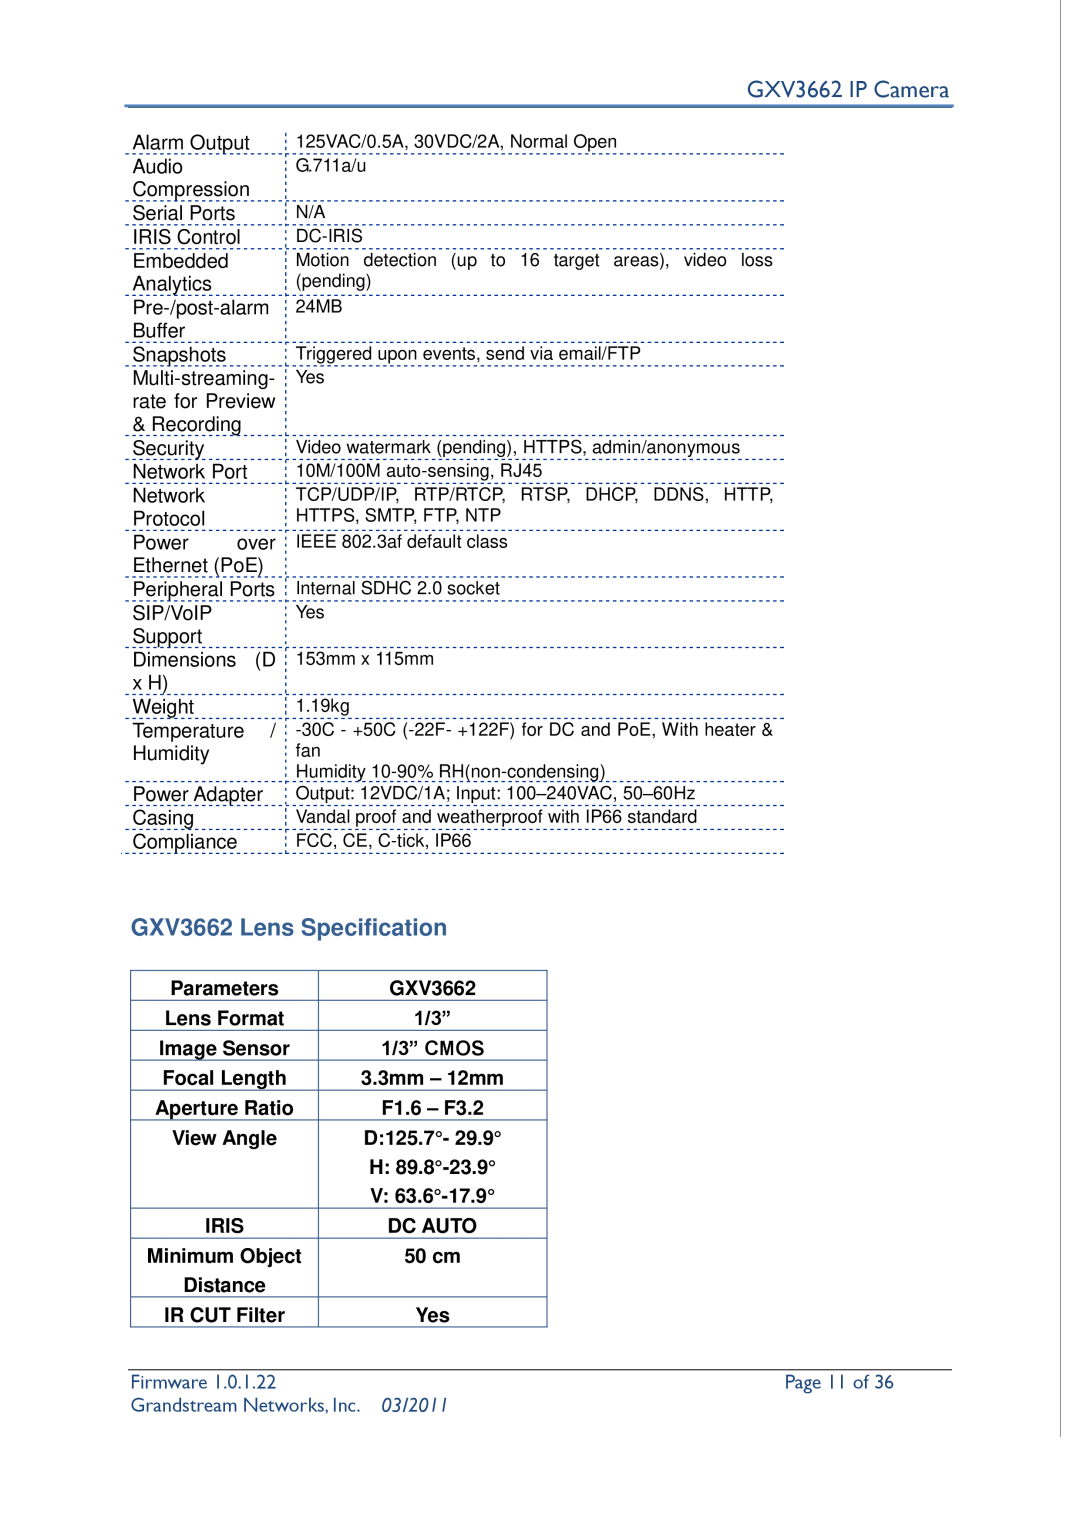 Grandstream Networks user manual GXV3662 Lens Specification, 03/2011, GXV3662 IP Camera, Firmware, Page 11 of 